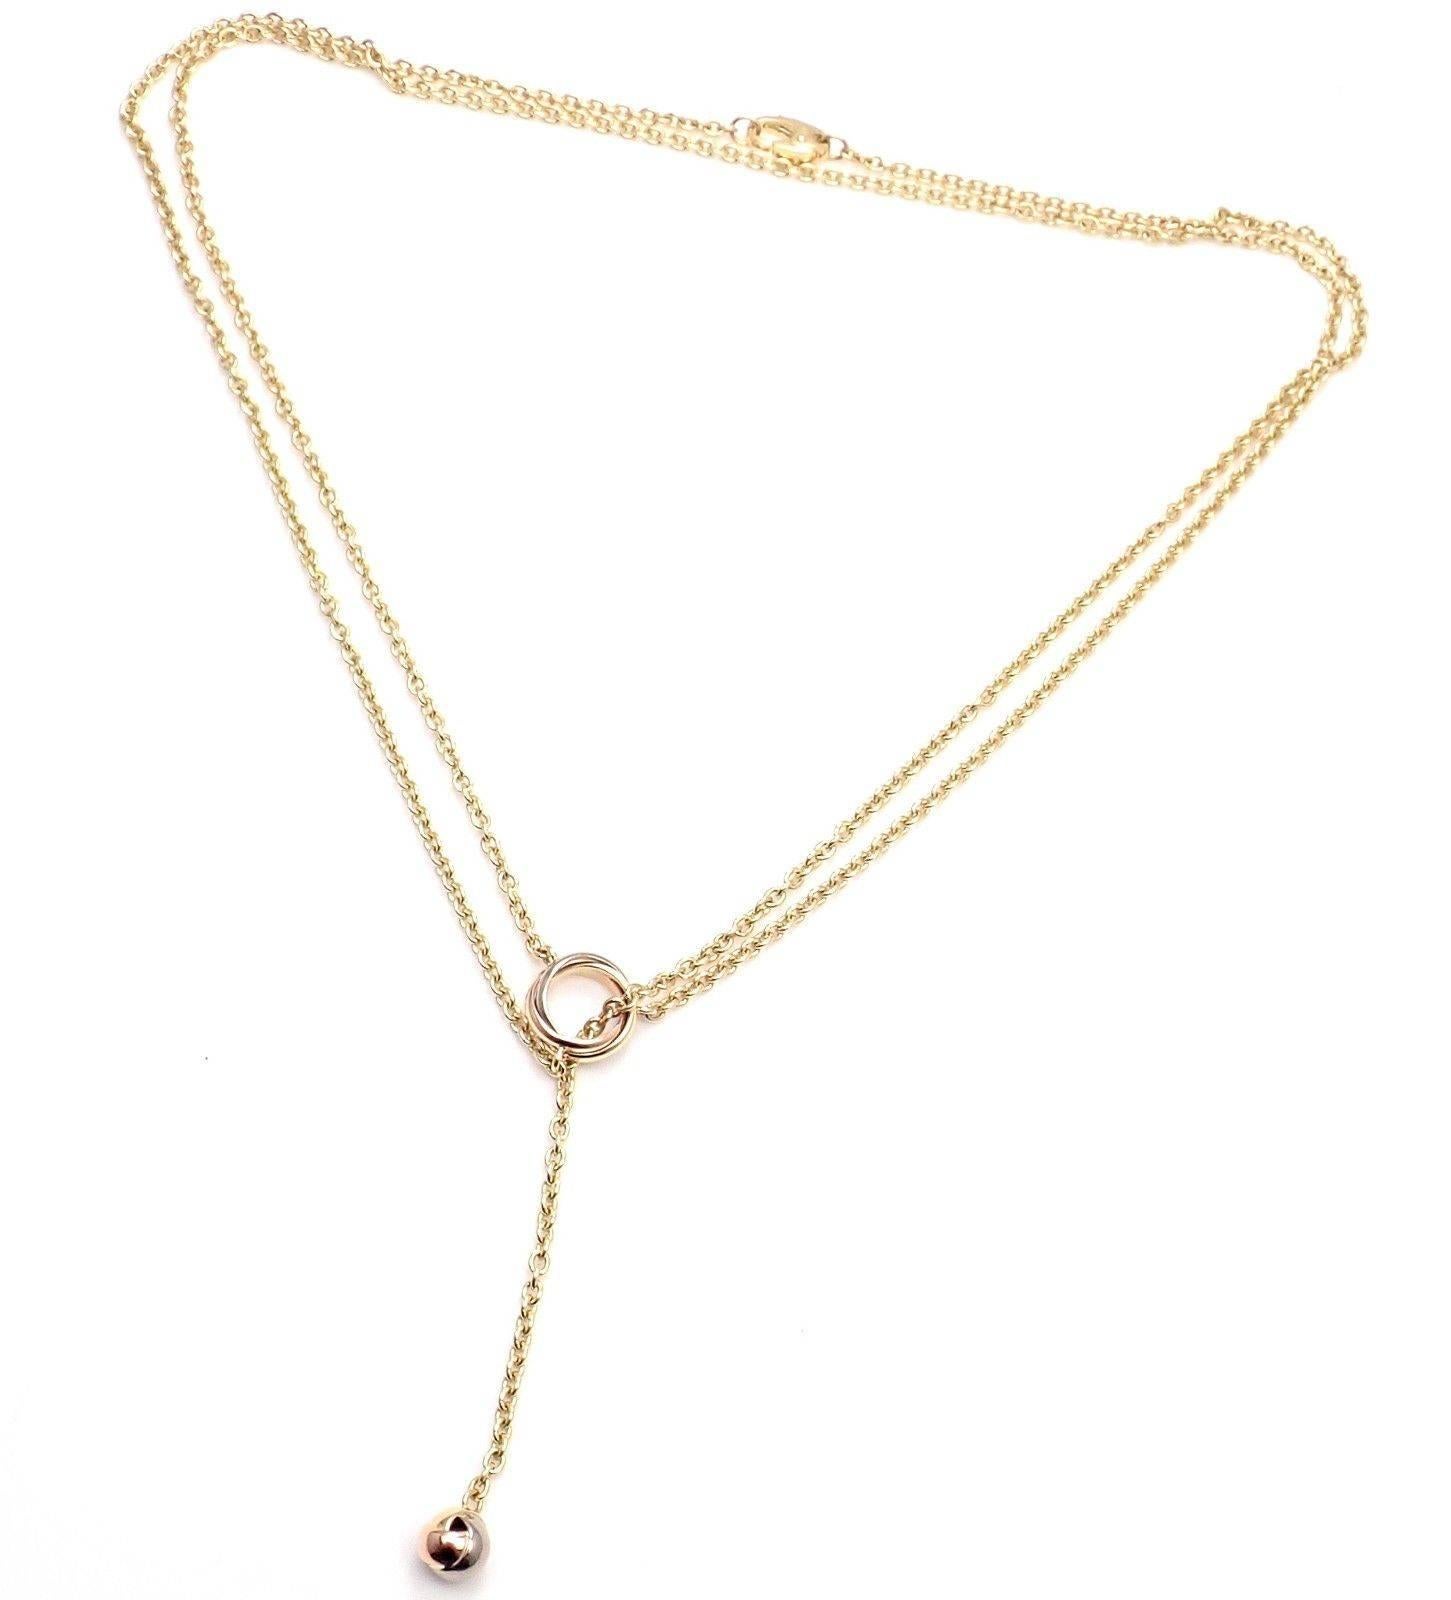 18k Tri-Color Gold Baby Trinity Pampilles Lariat Necklace by Cartier.
Details:
Chain Length: 15.5